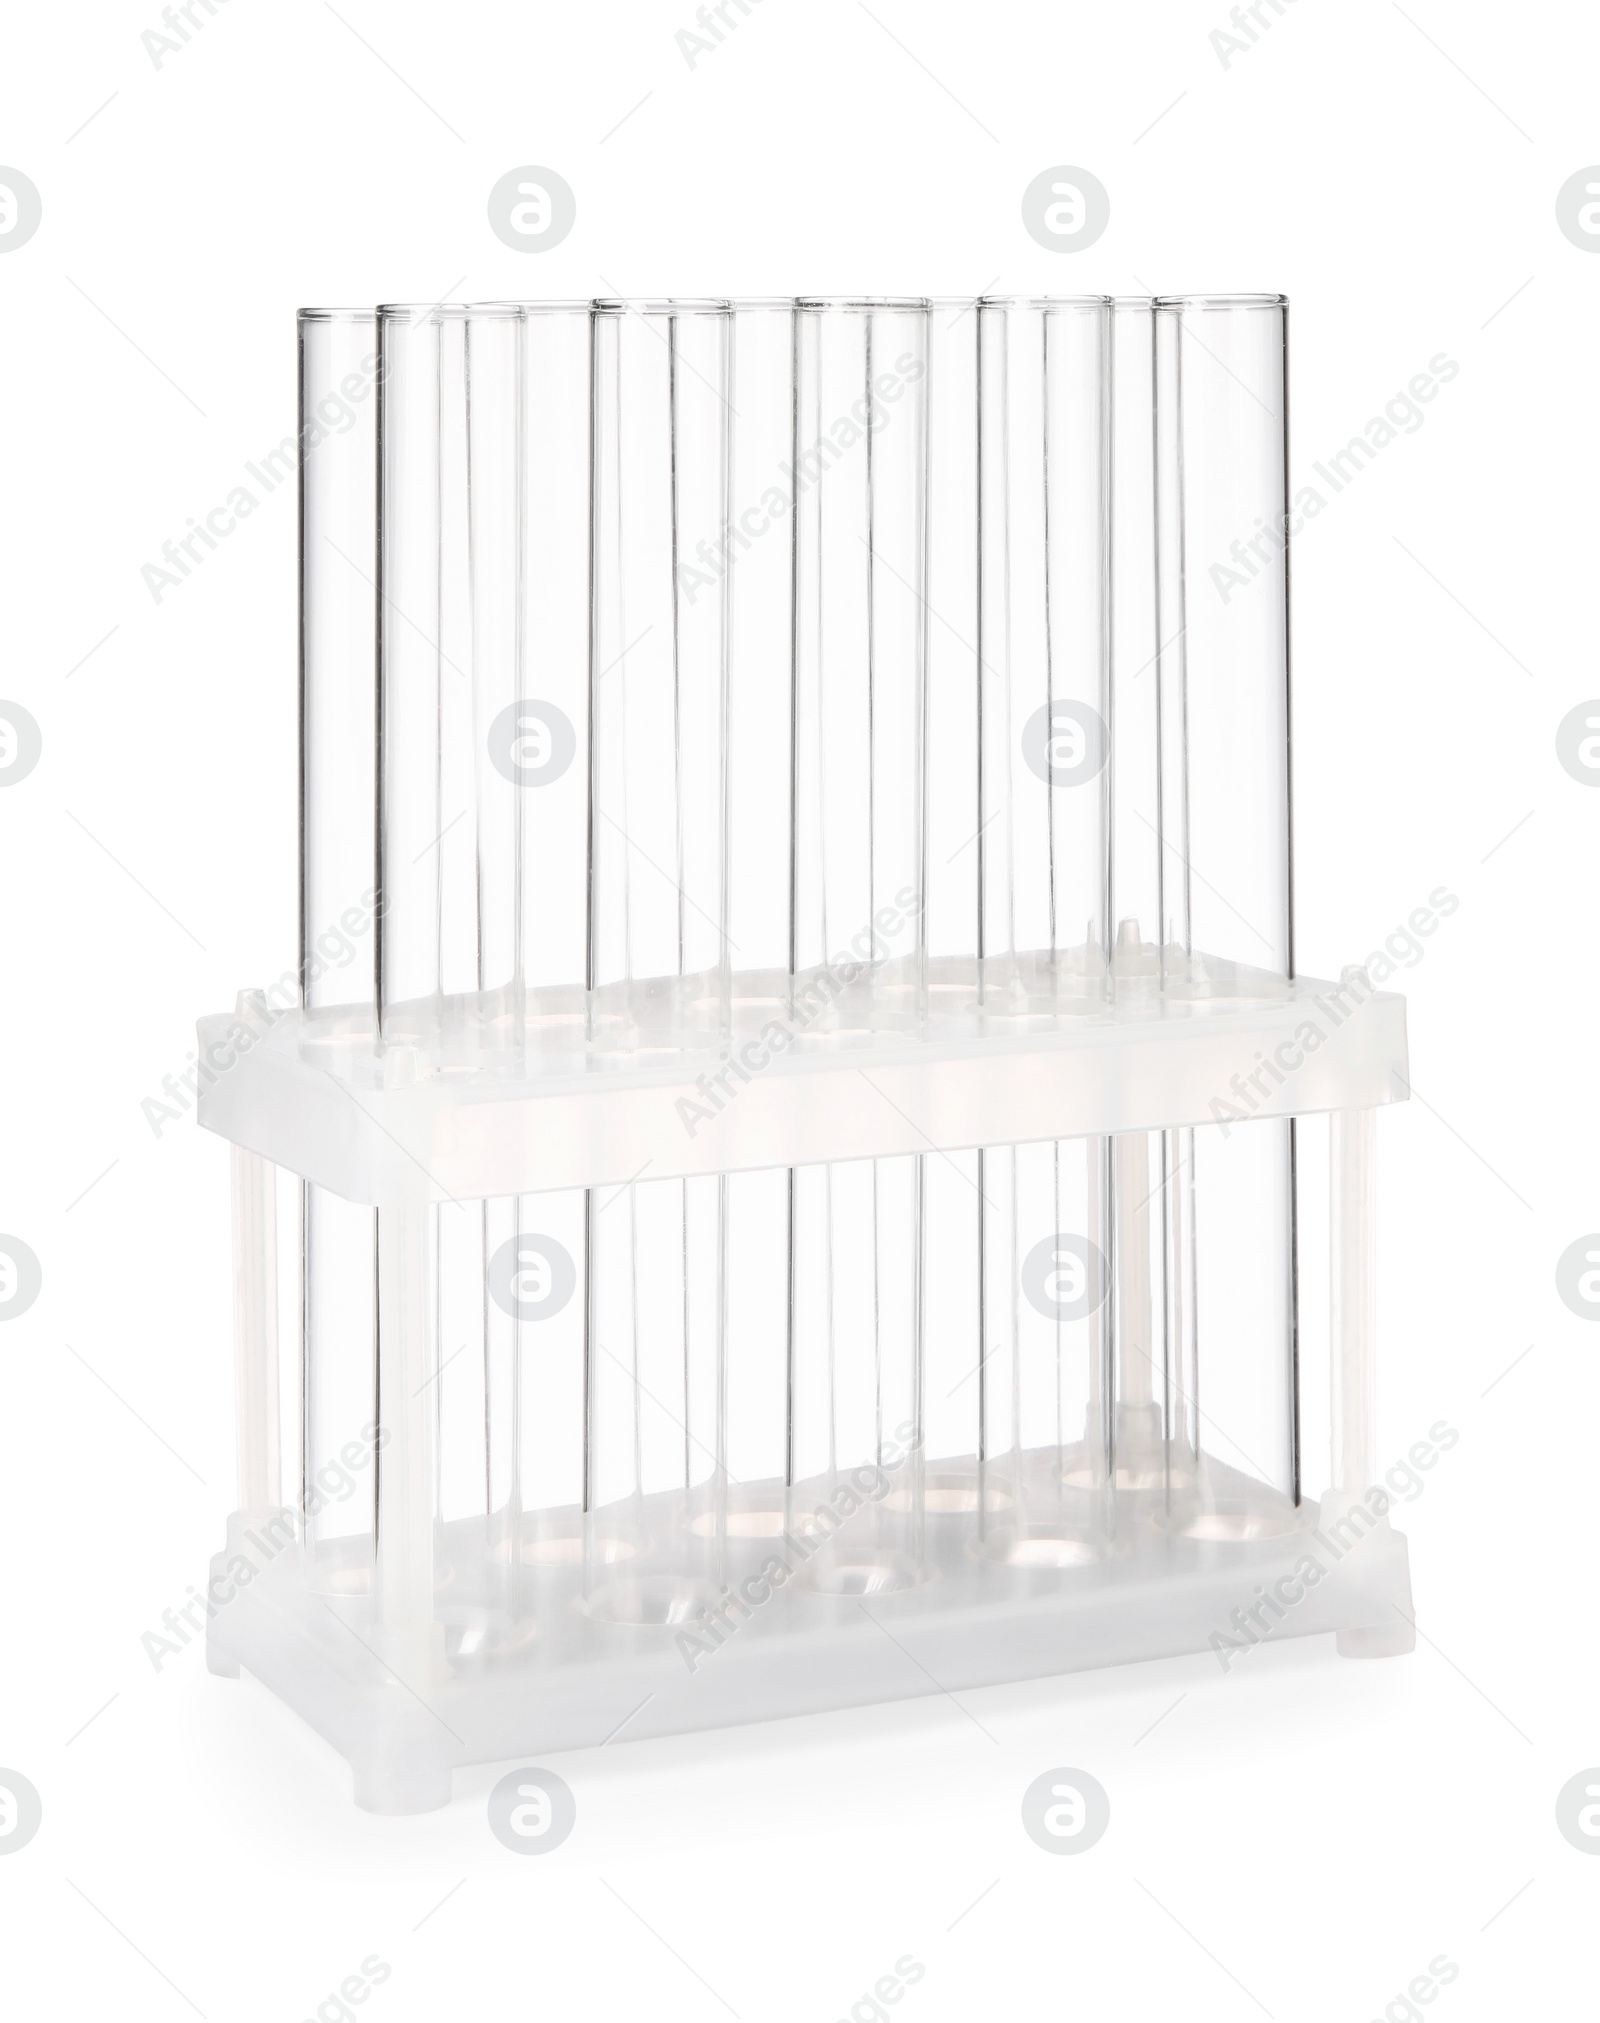 Photo of Stand with empty test tubes isolated on white